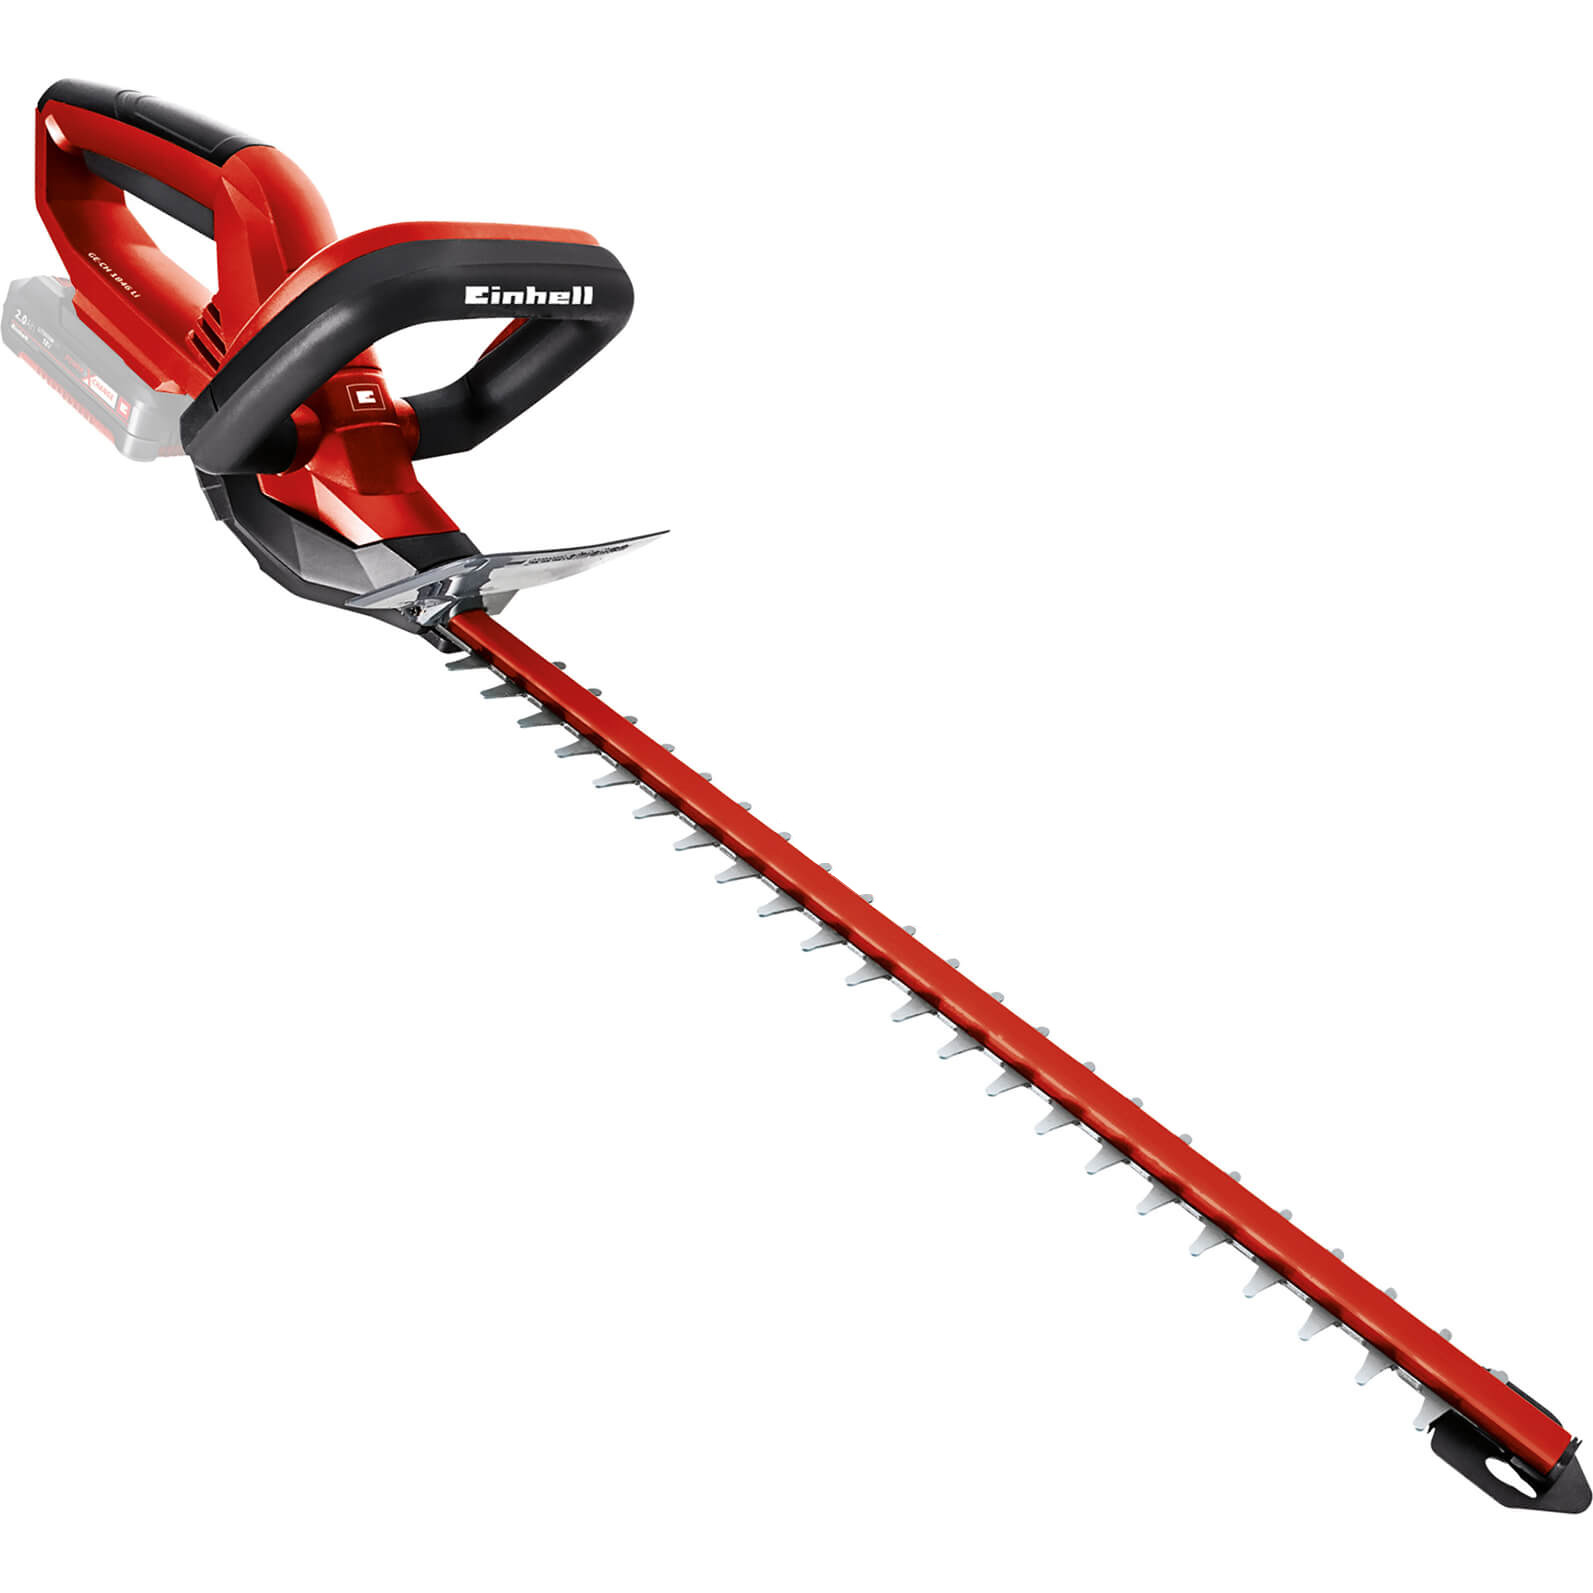 Einhell GE-CH 1846 Li 18v Cordless Hedge Trimmer 460mm No Batteries No Charger